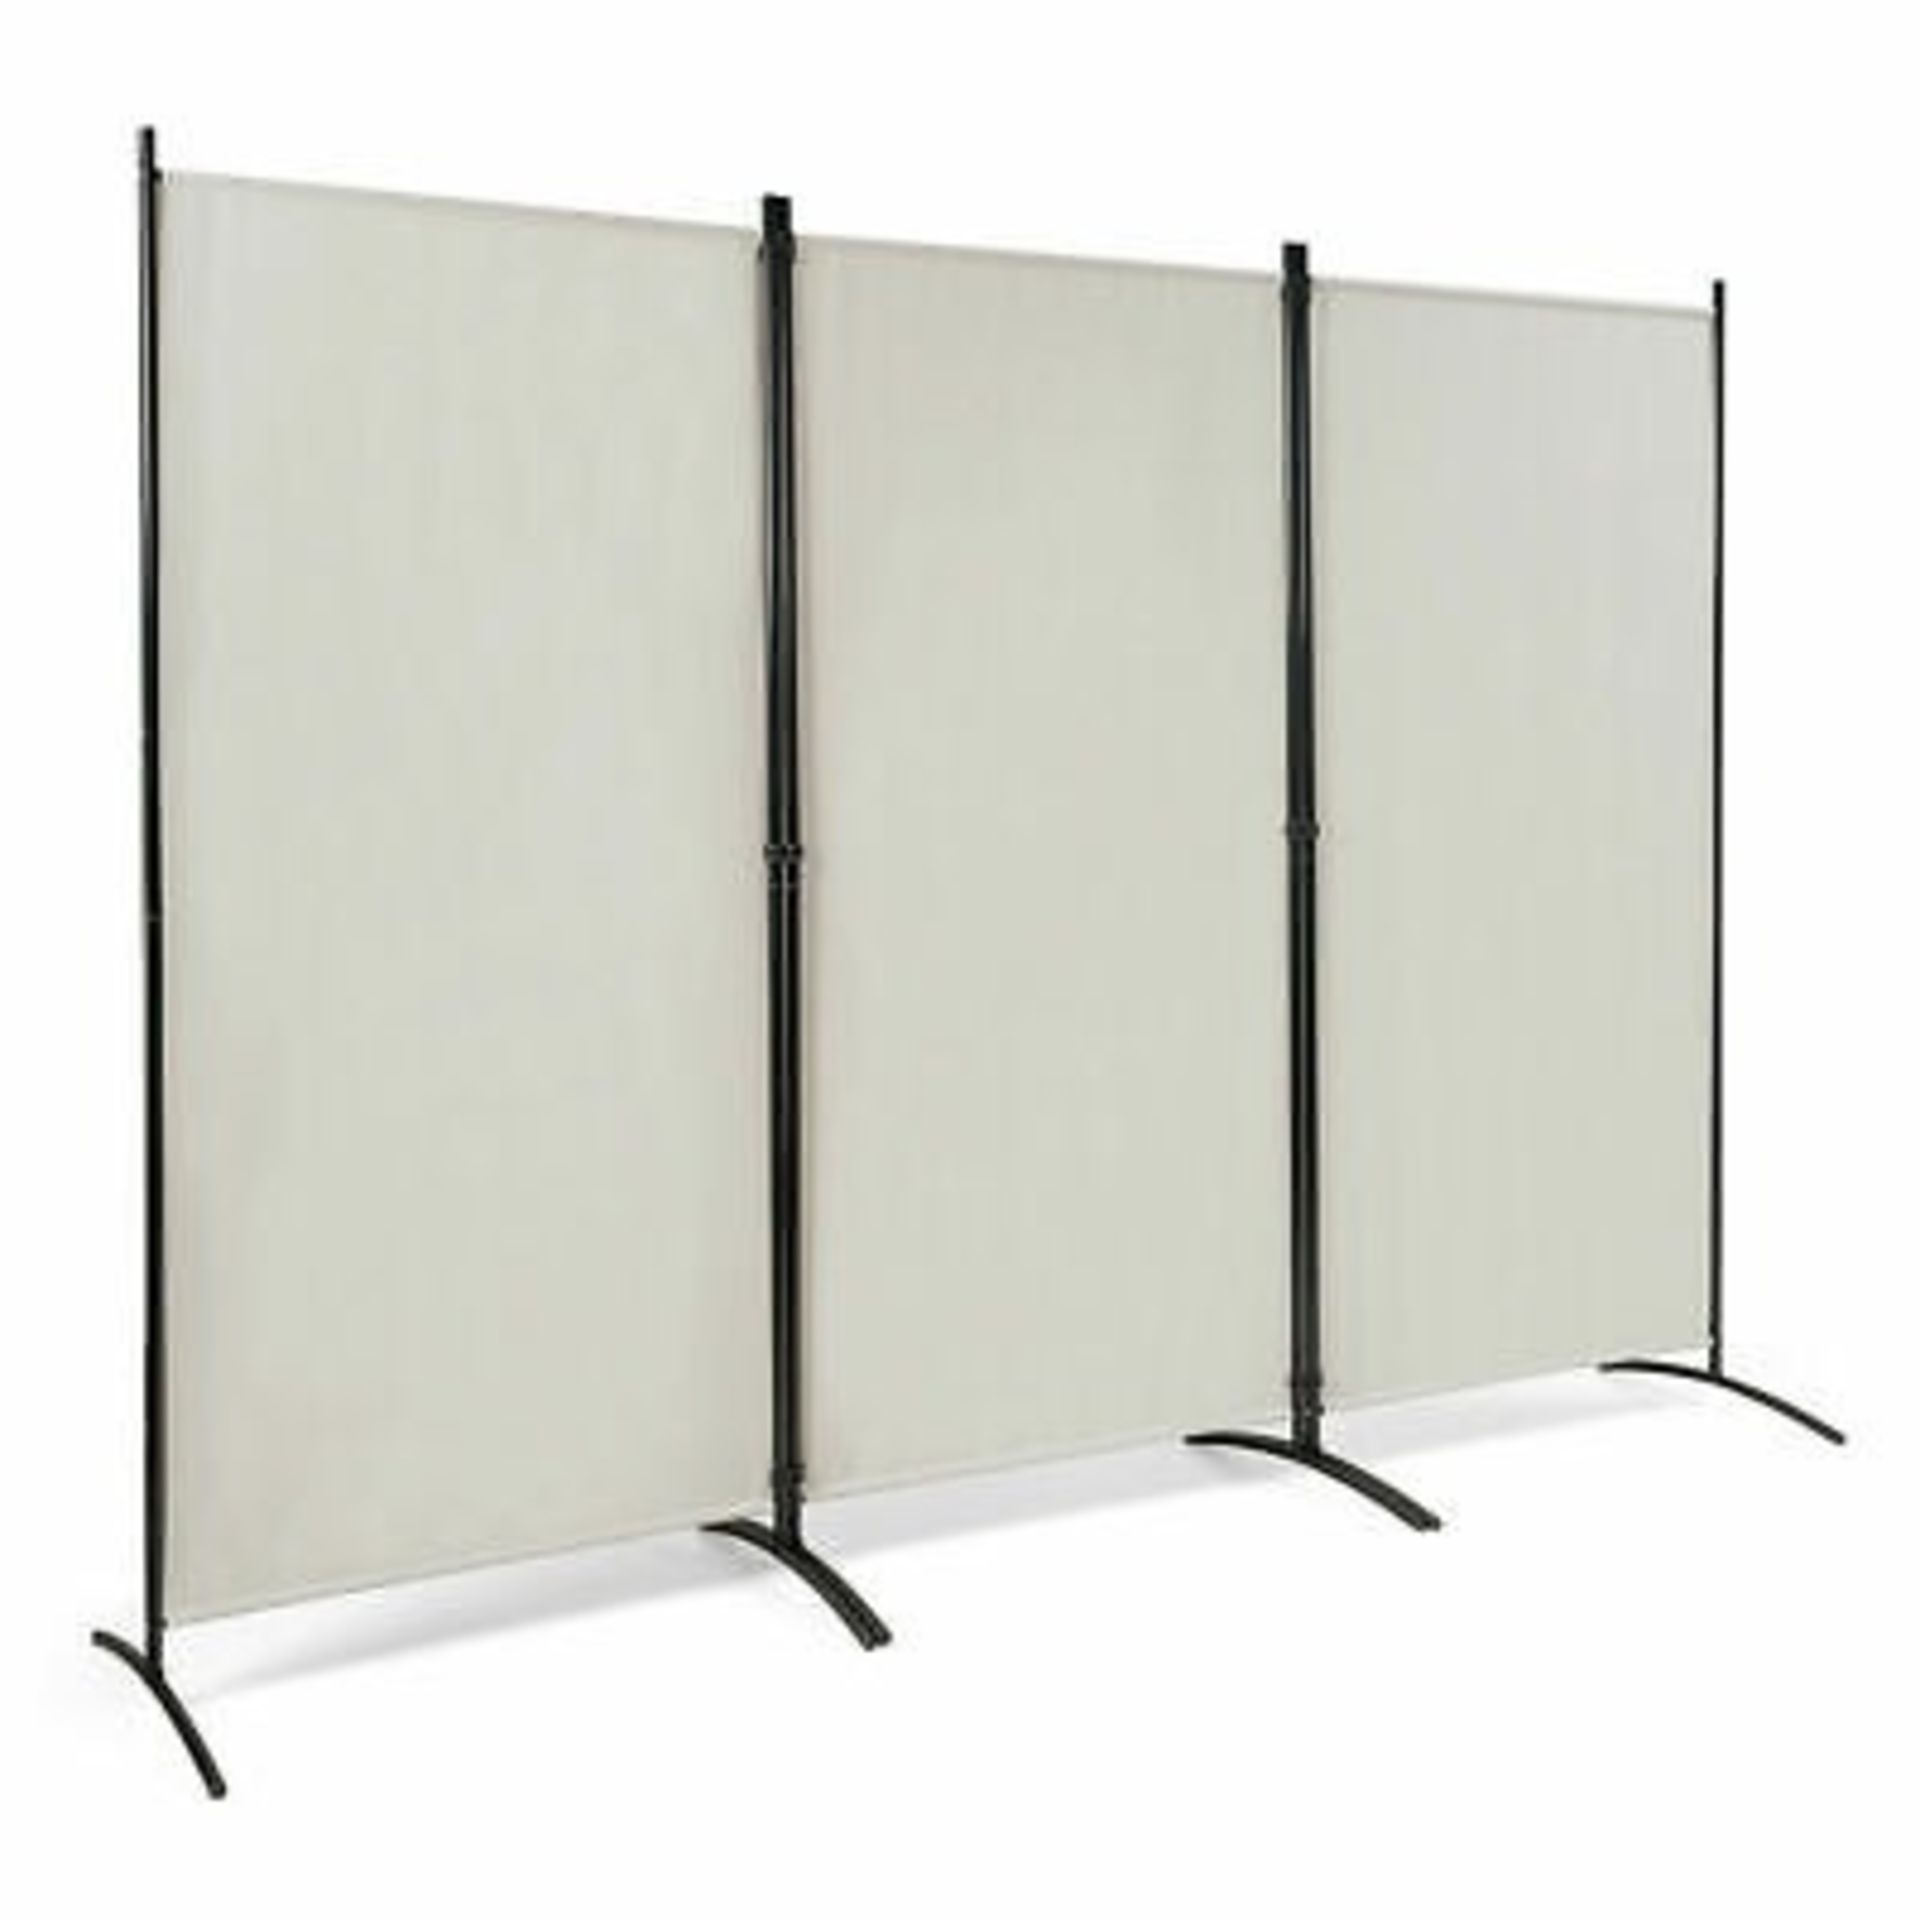 Folding Room Divider 3 Panel Wall Privacy Screen Protector - ER54